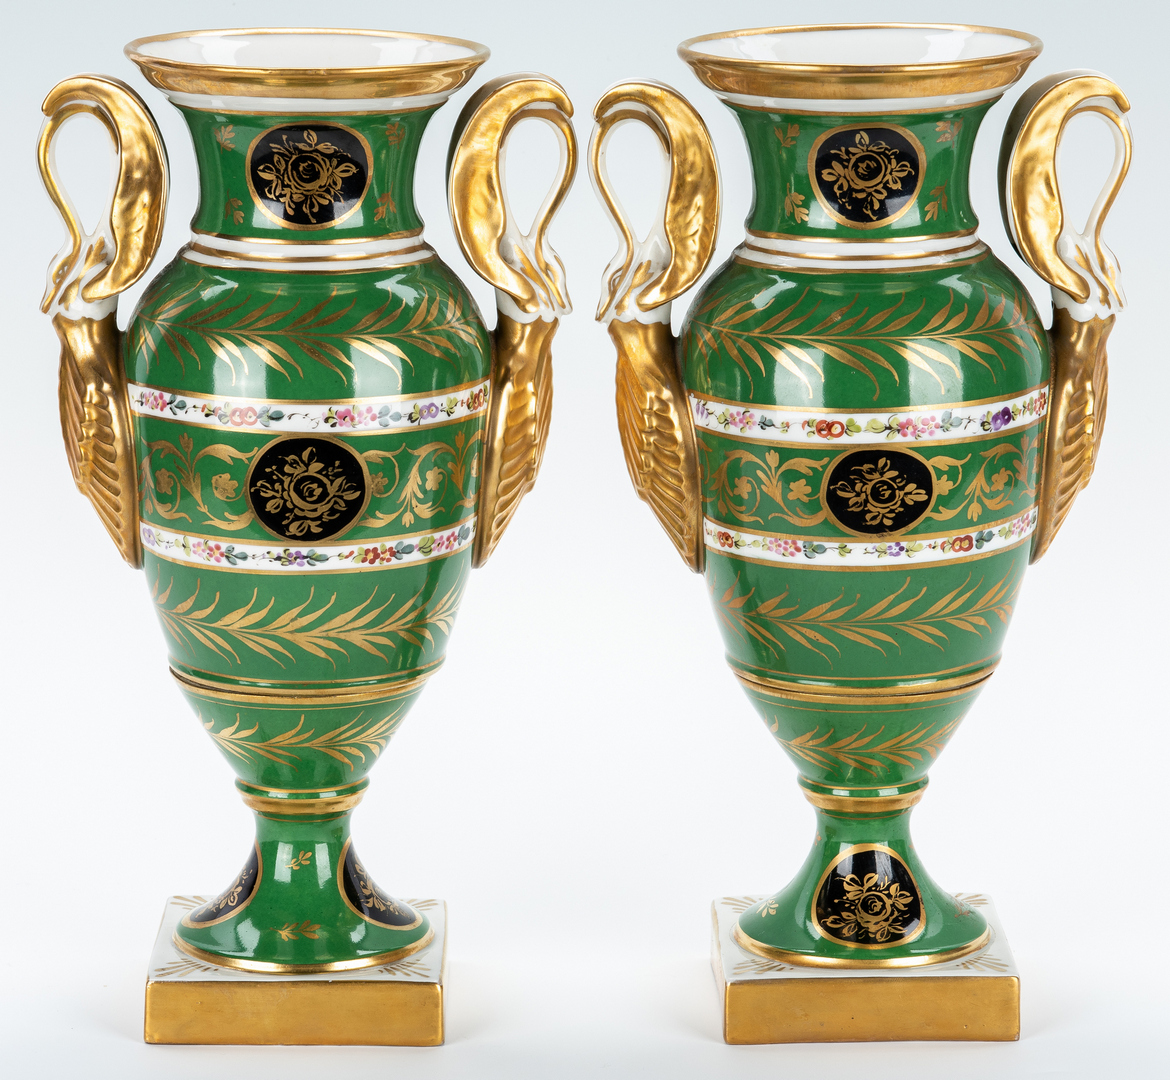 Lot 843: Pair of French Porcelain Urns